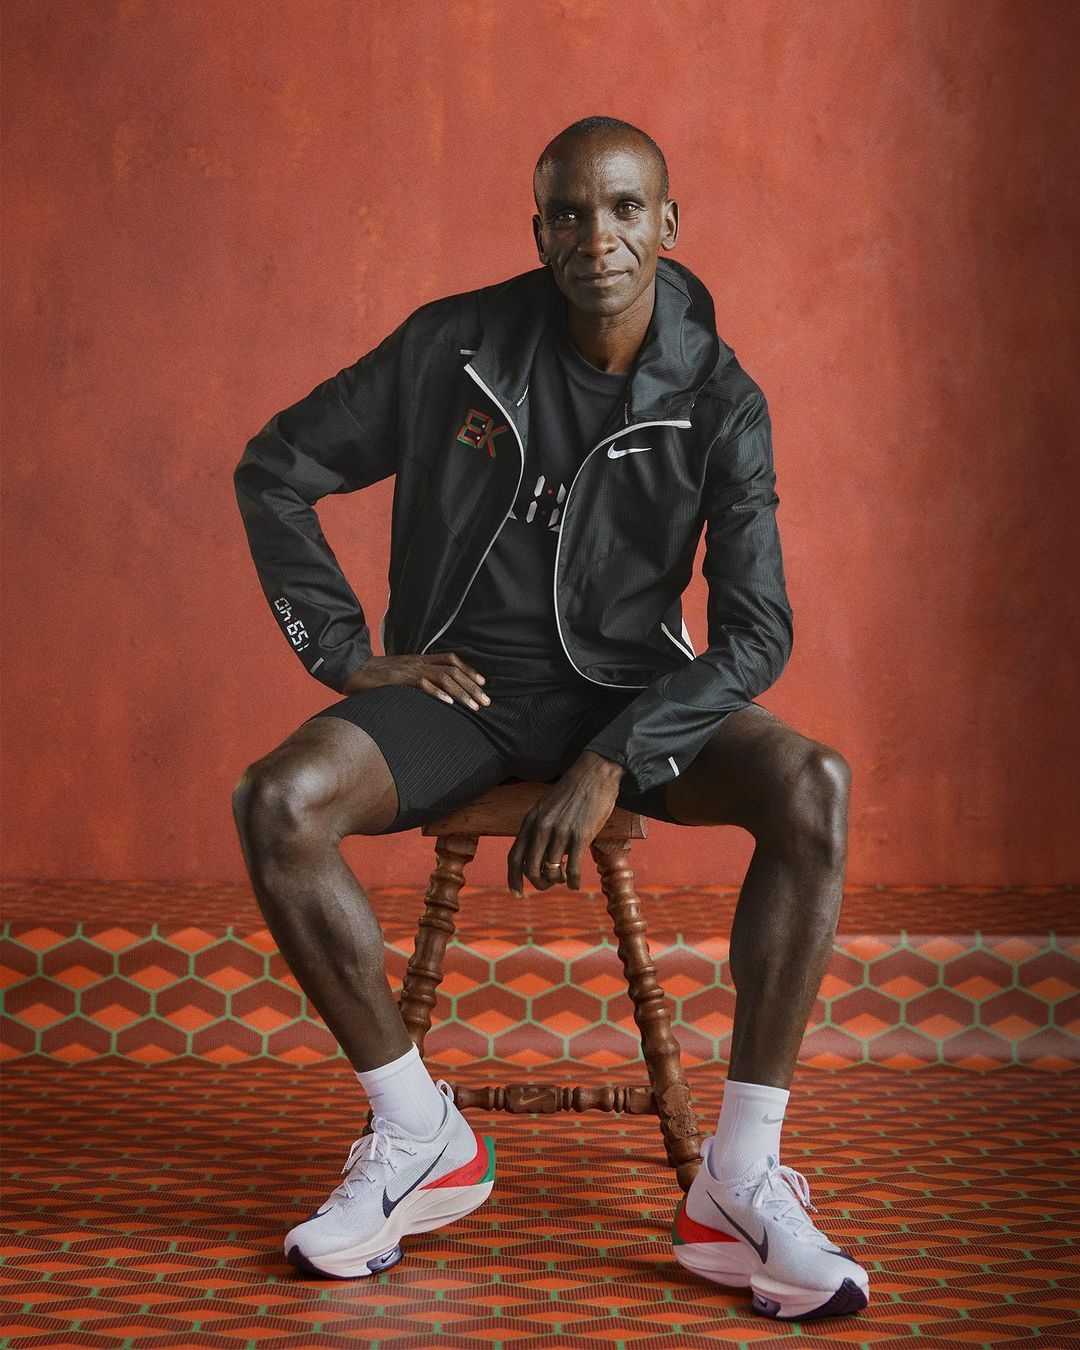 Shipley halfrond zoet The new Kipchoge Nike collection has dropped